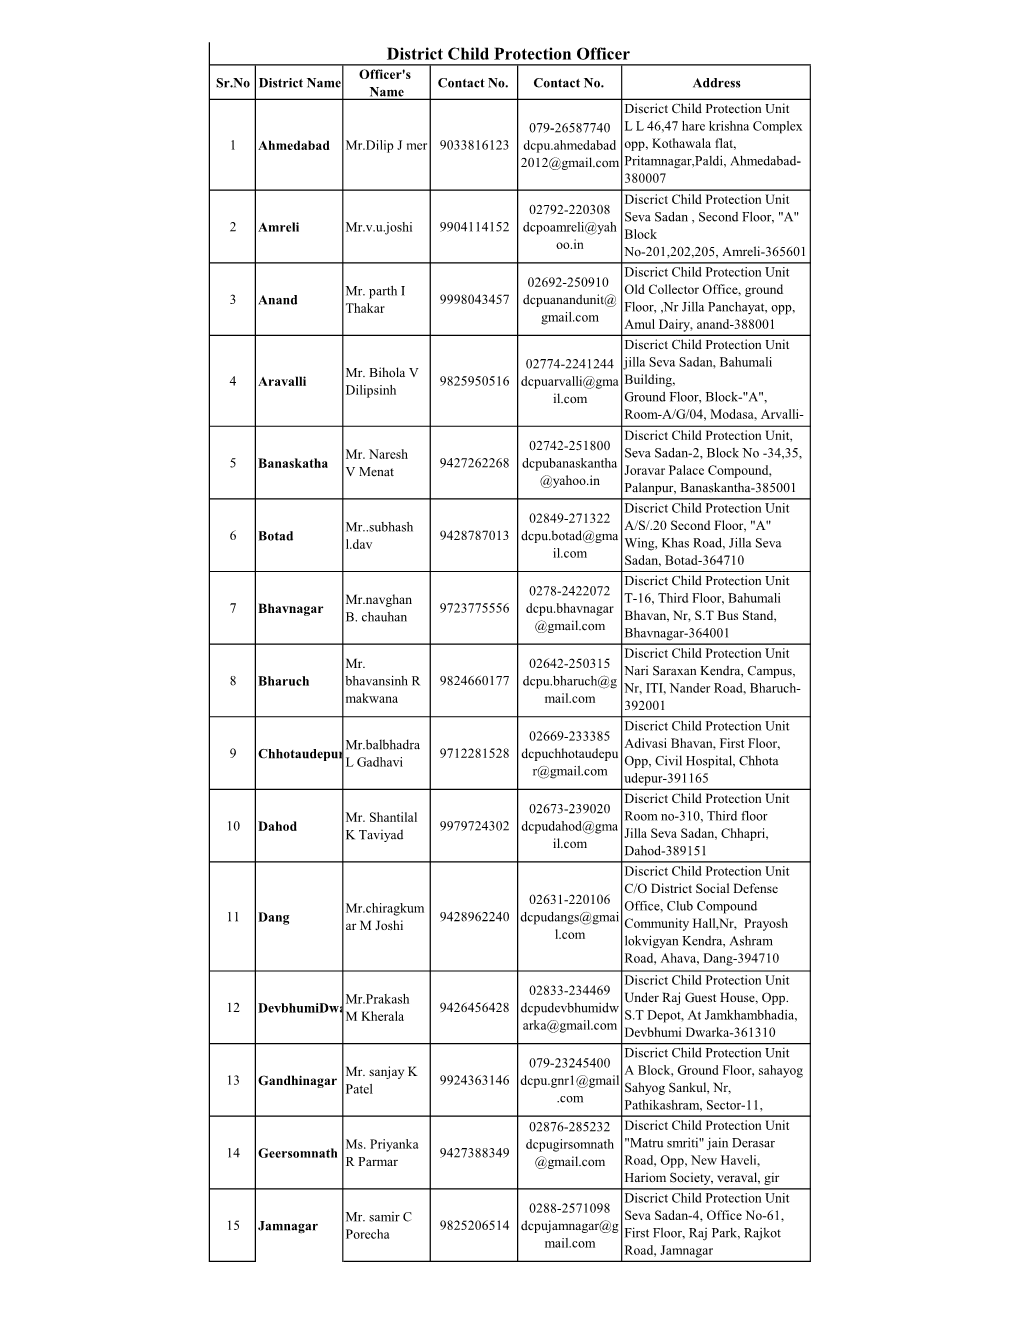 District Child Protection Officer Officer's Sr.No District Name Contact No